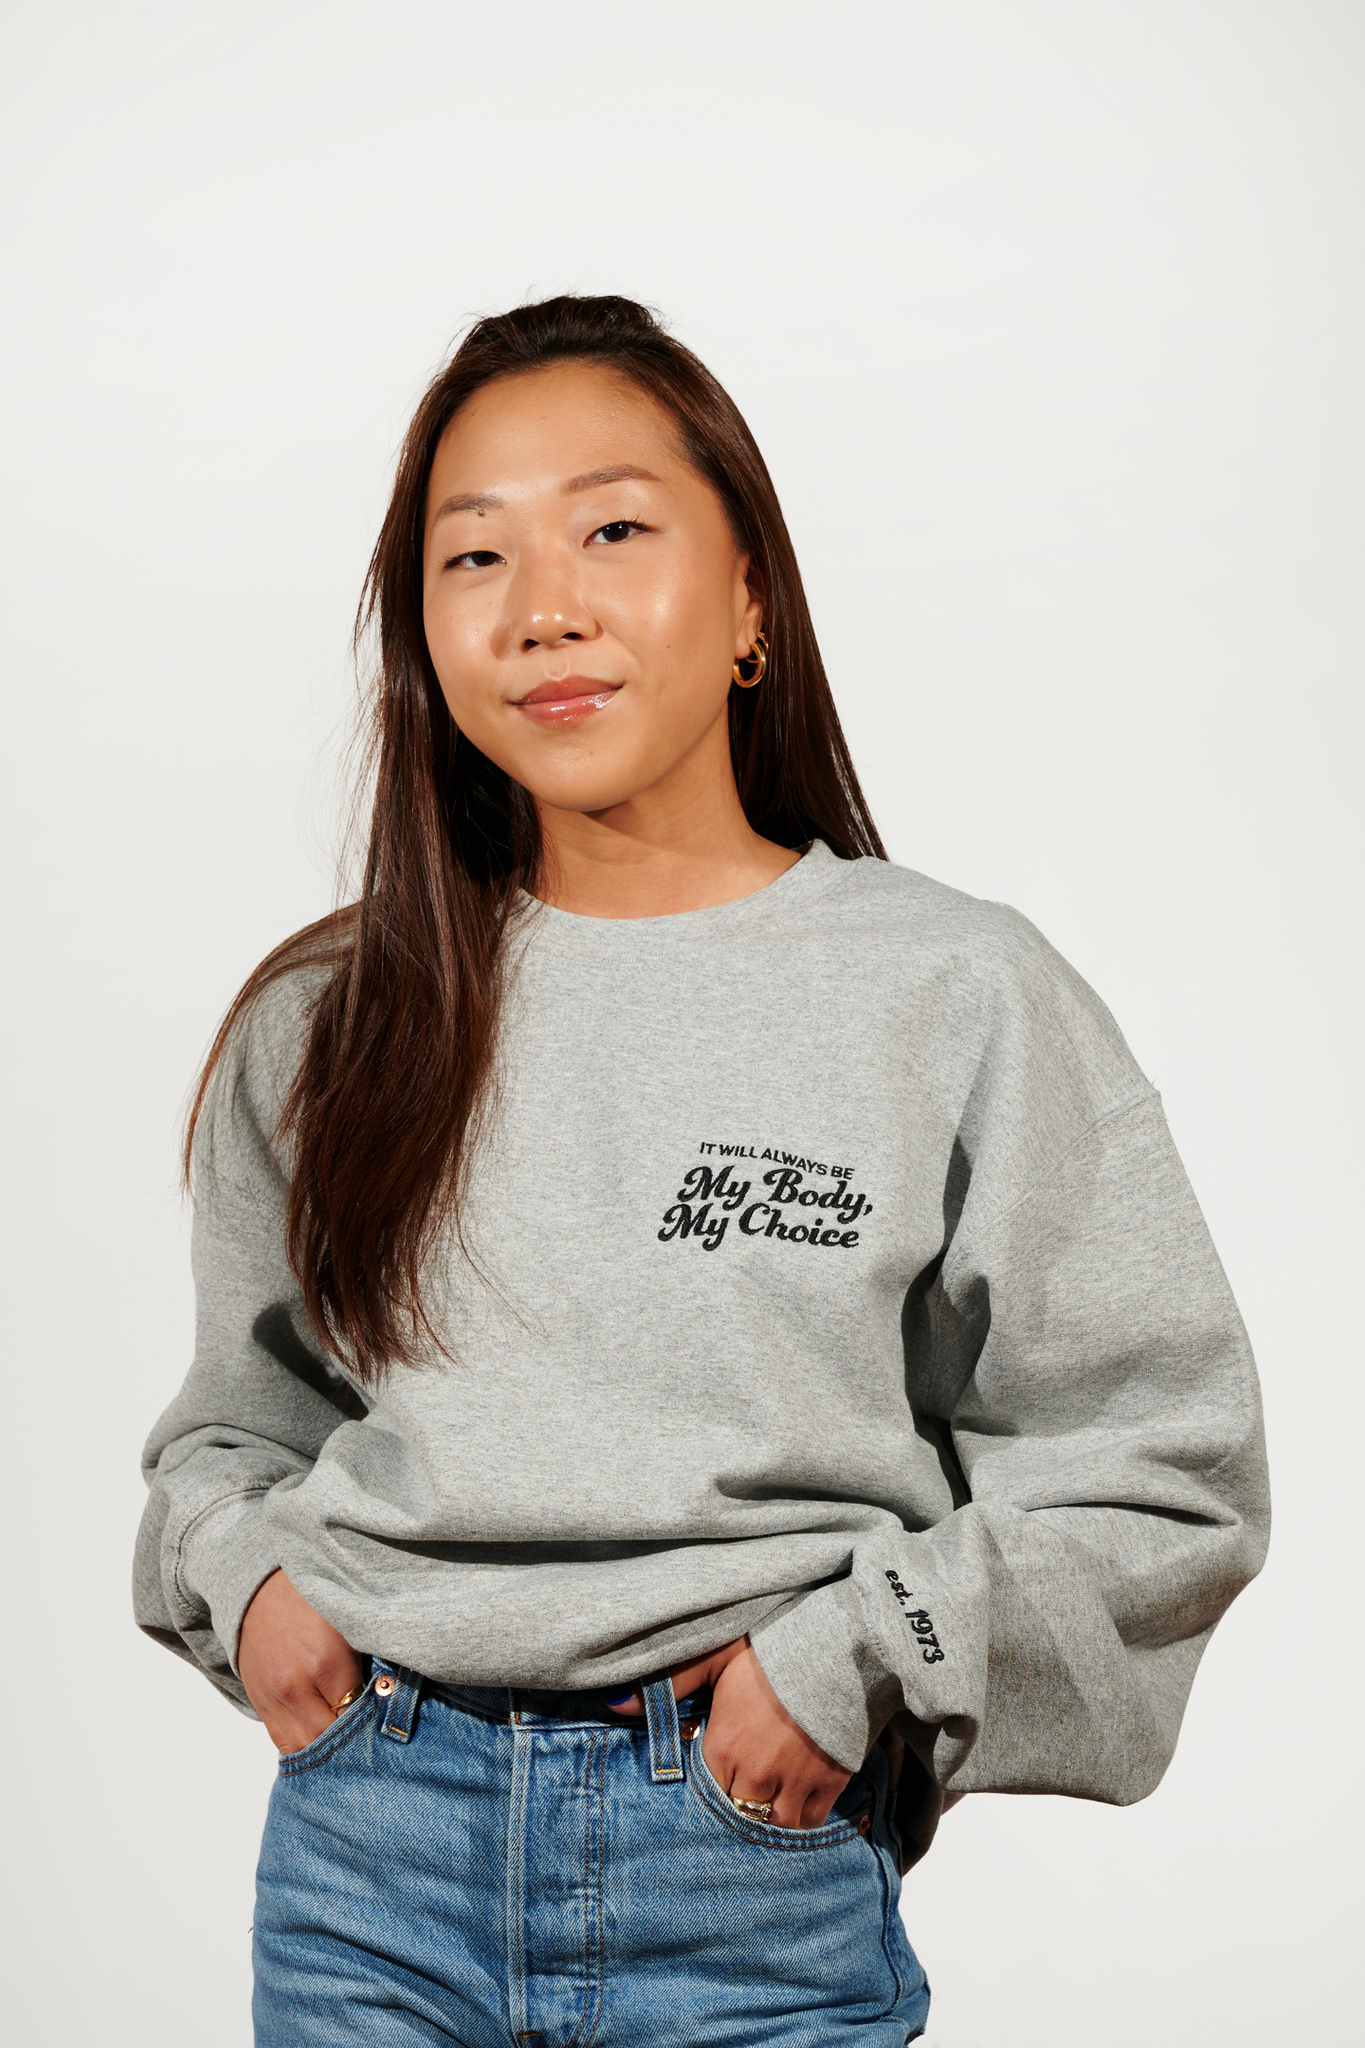 Urban Outfitters XLARGE Embroidered Souvenir Crew Neck Sweatshirt